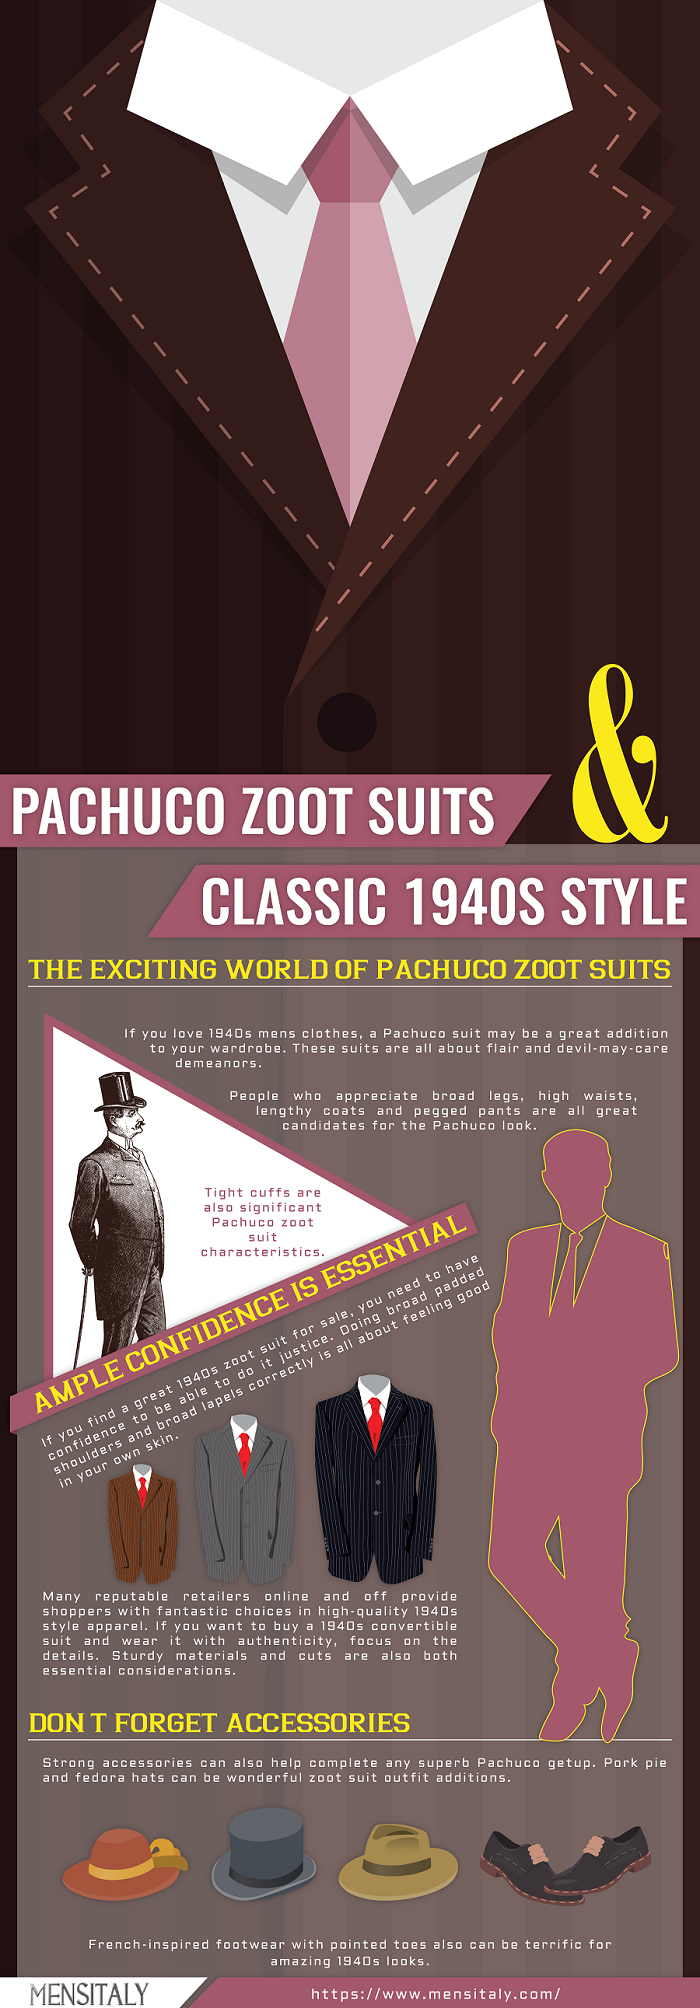 pachuco zoot suits classic styles infographics 1940s mens suits vintage fashion